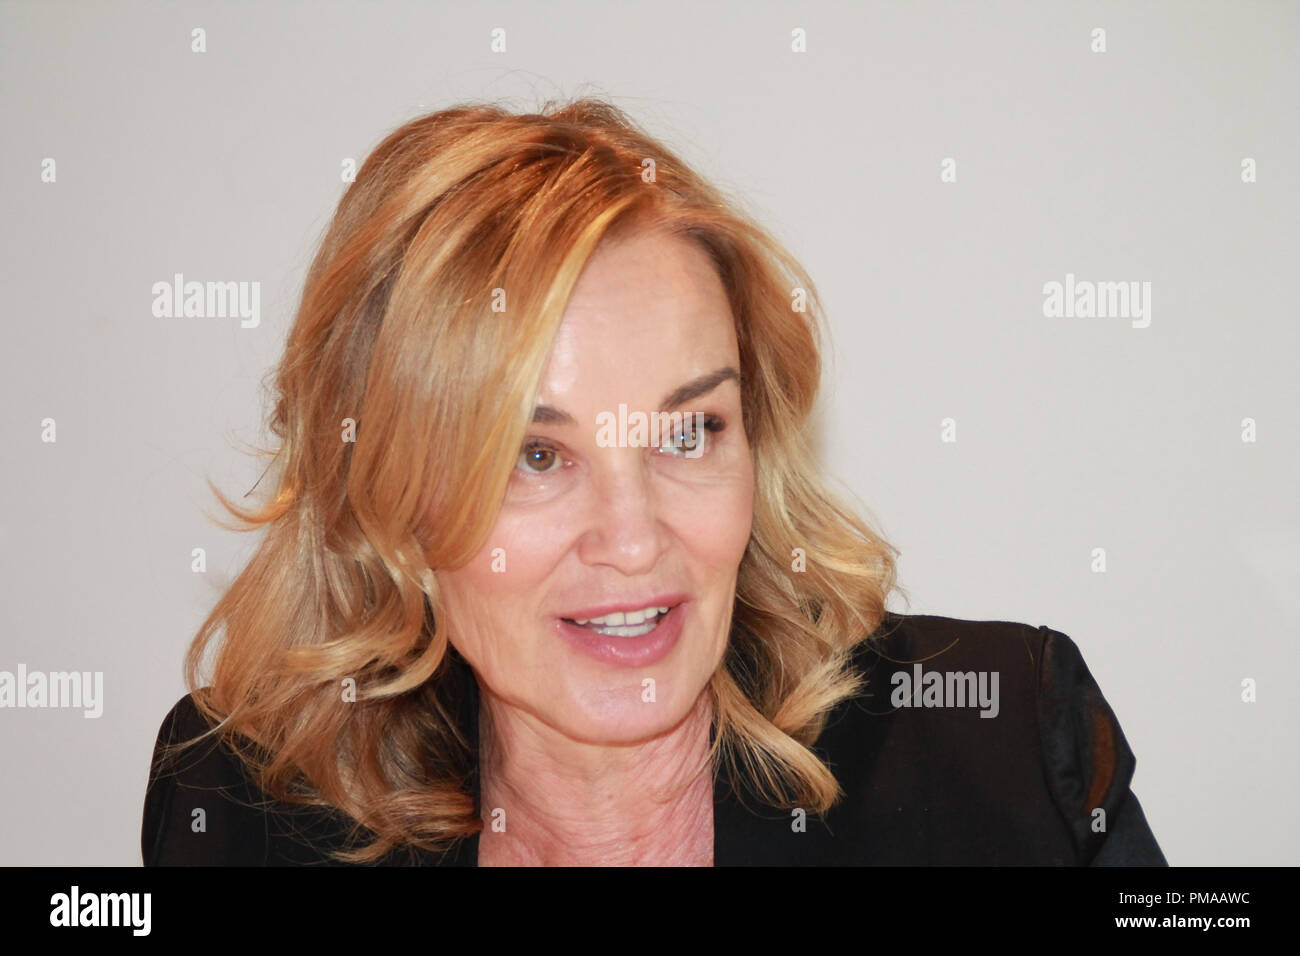 Jessica Lange "American Horror Story" TV Series Portrait Session,October 7, 2013. Reproduction by American tabloids is absolutely forbidden. File Reference # 32153_009JRC  For Editorial Use Only -  All Rights Reserved Stock Photo